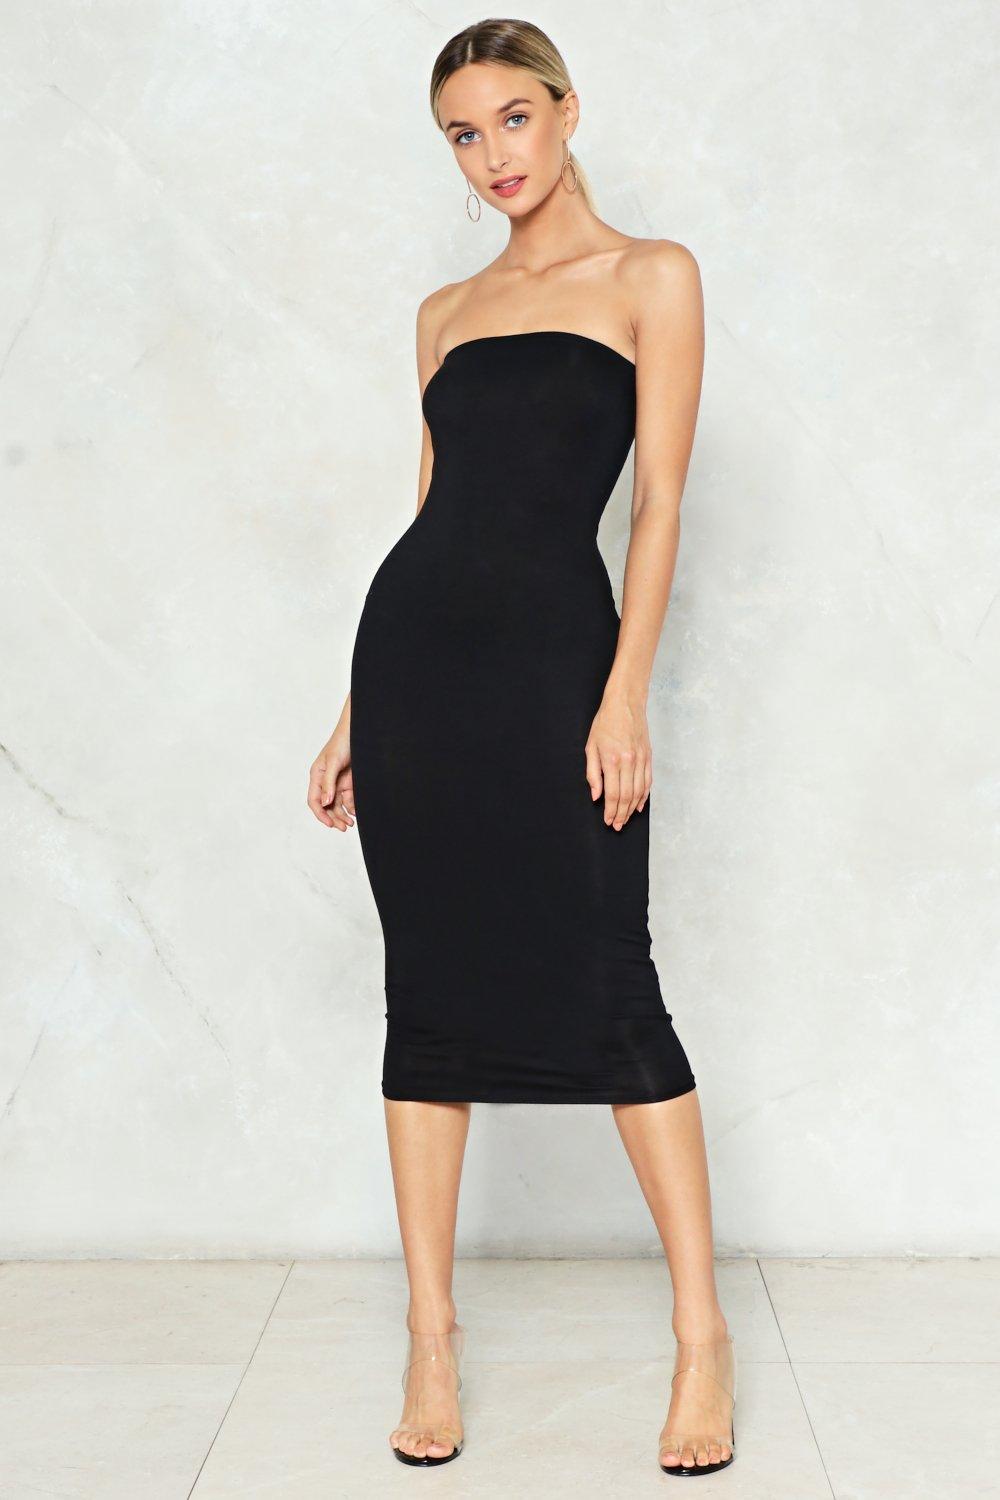 Strapless dresses simple as that strapless dress ZXBJHNL